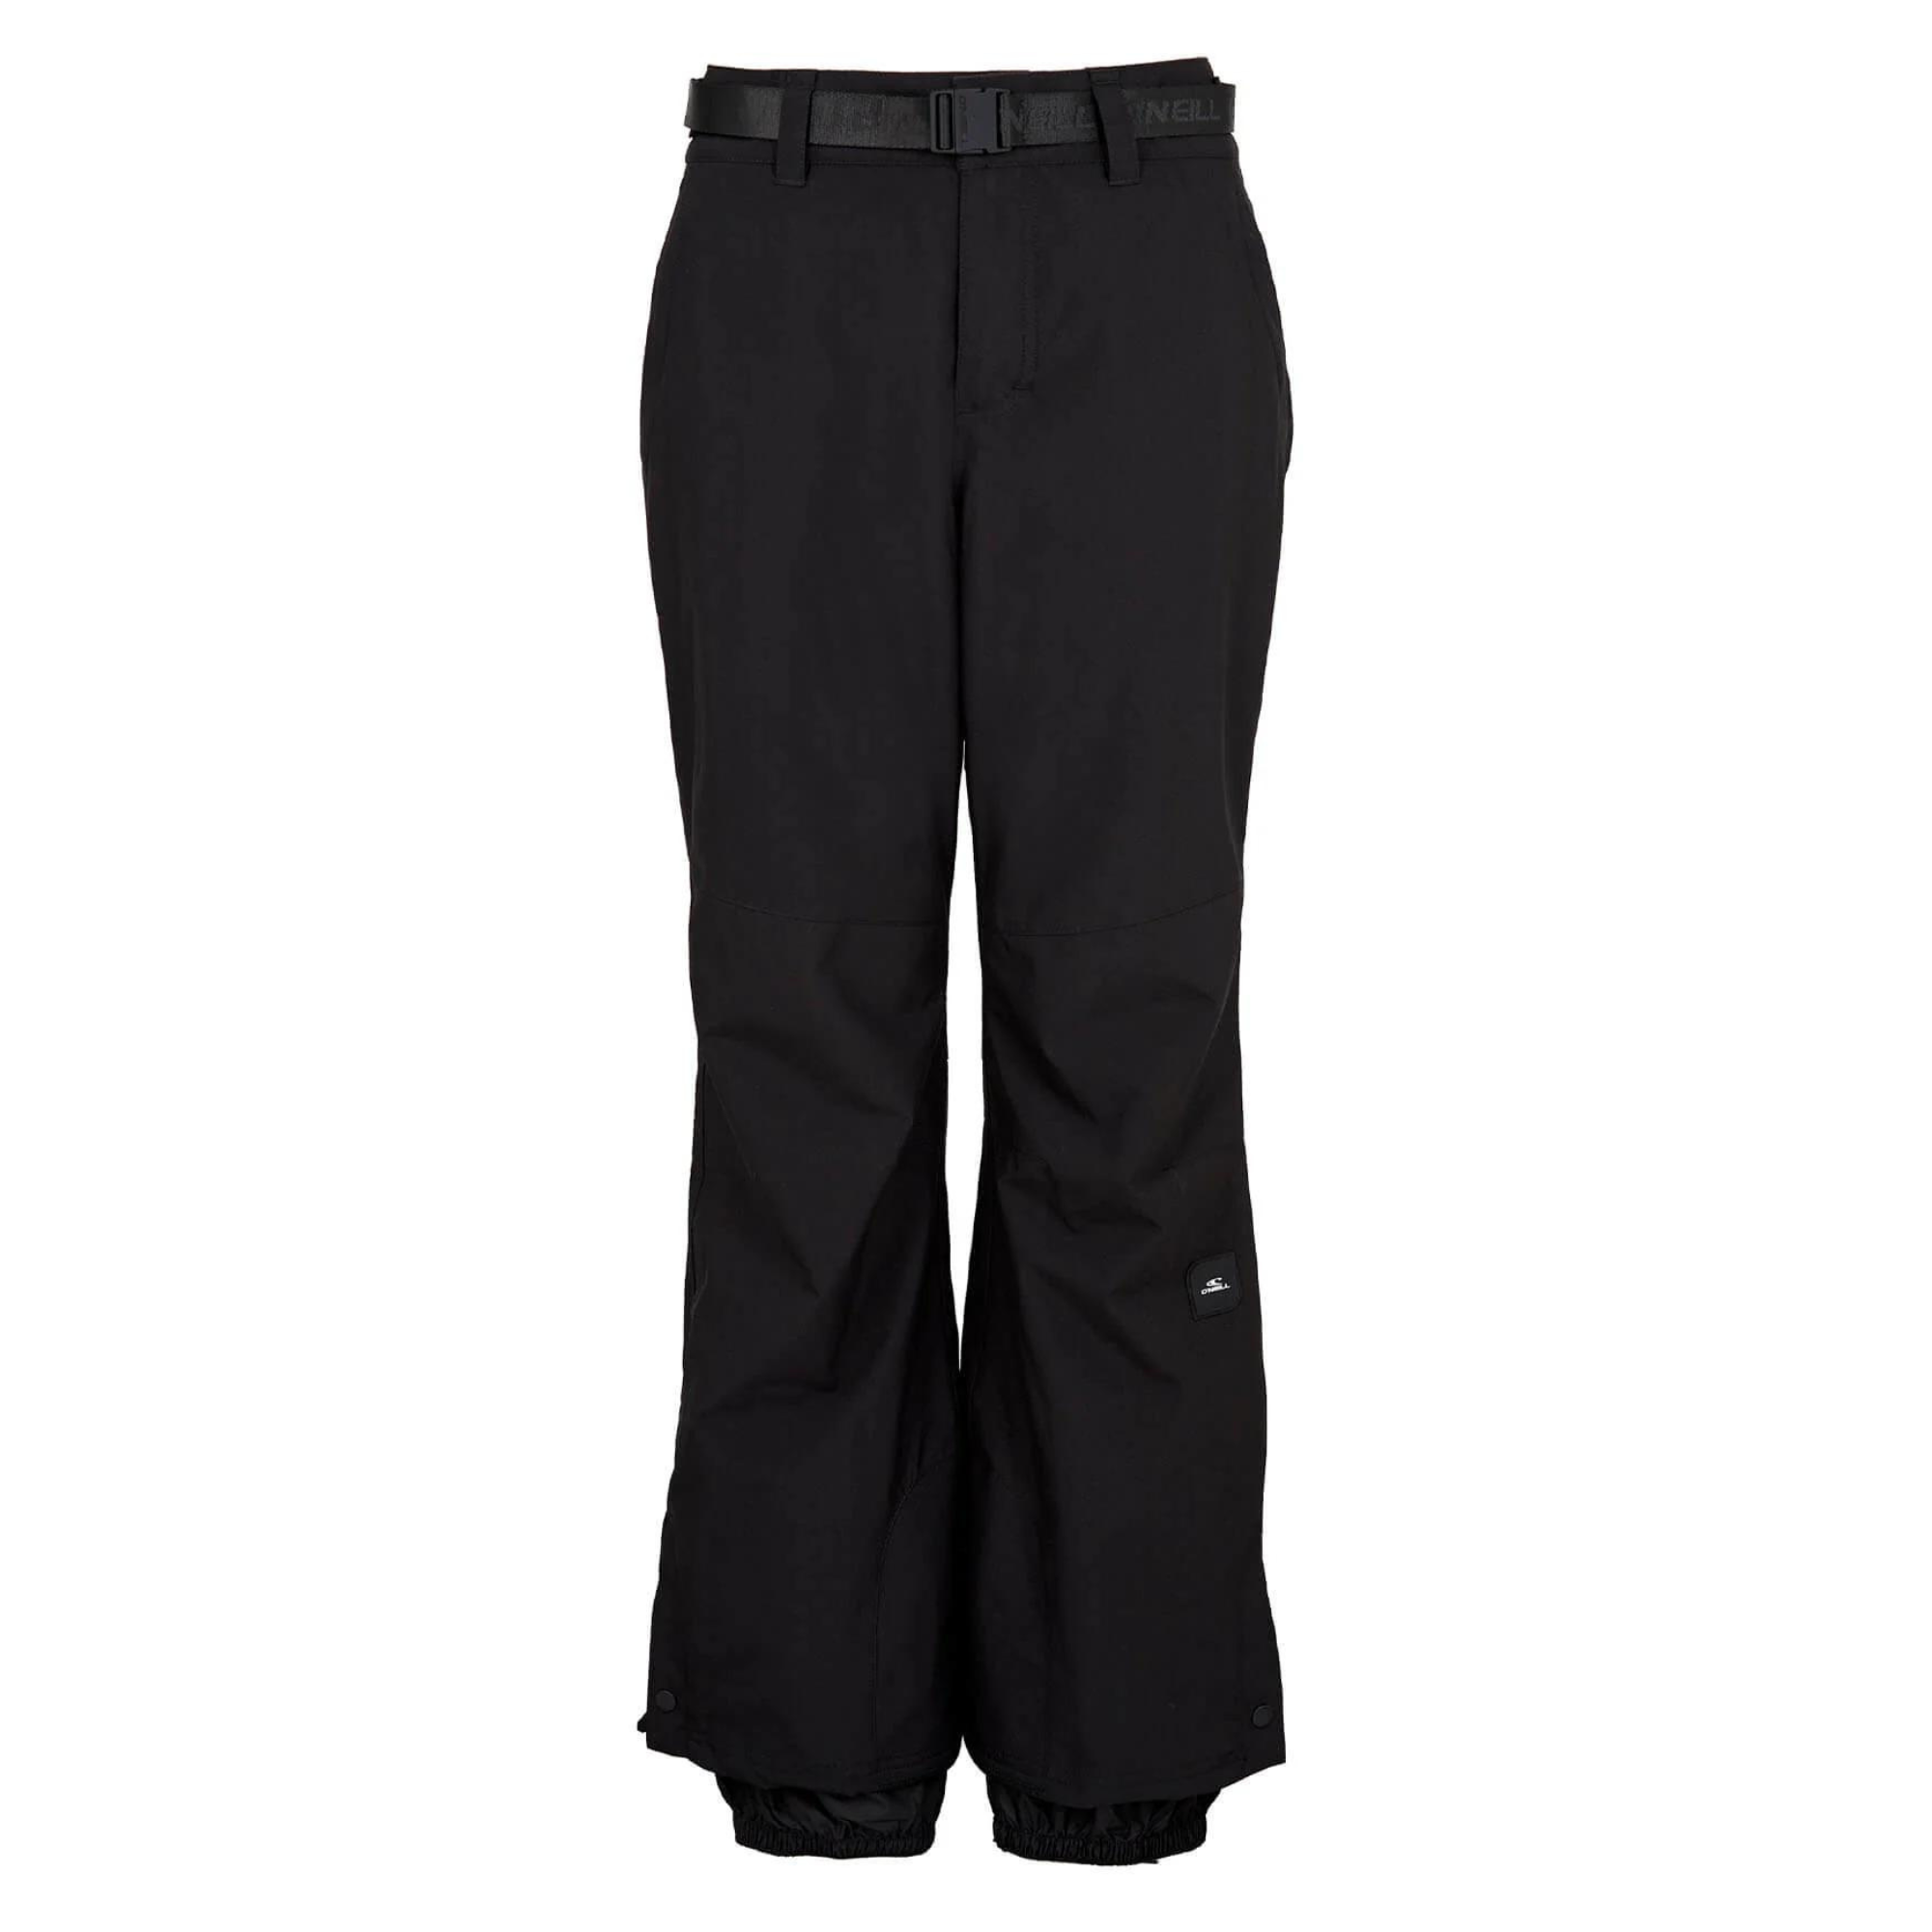 O'Neill Women's Star Pants - Black Out